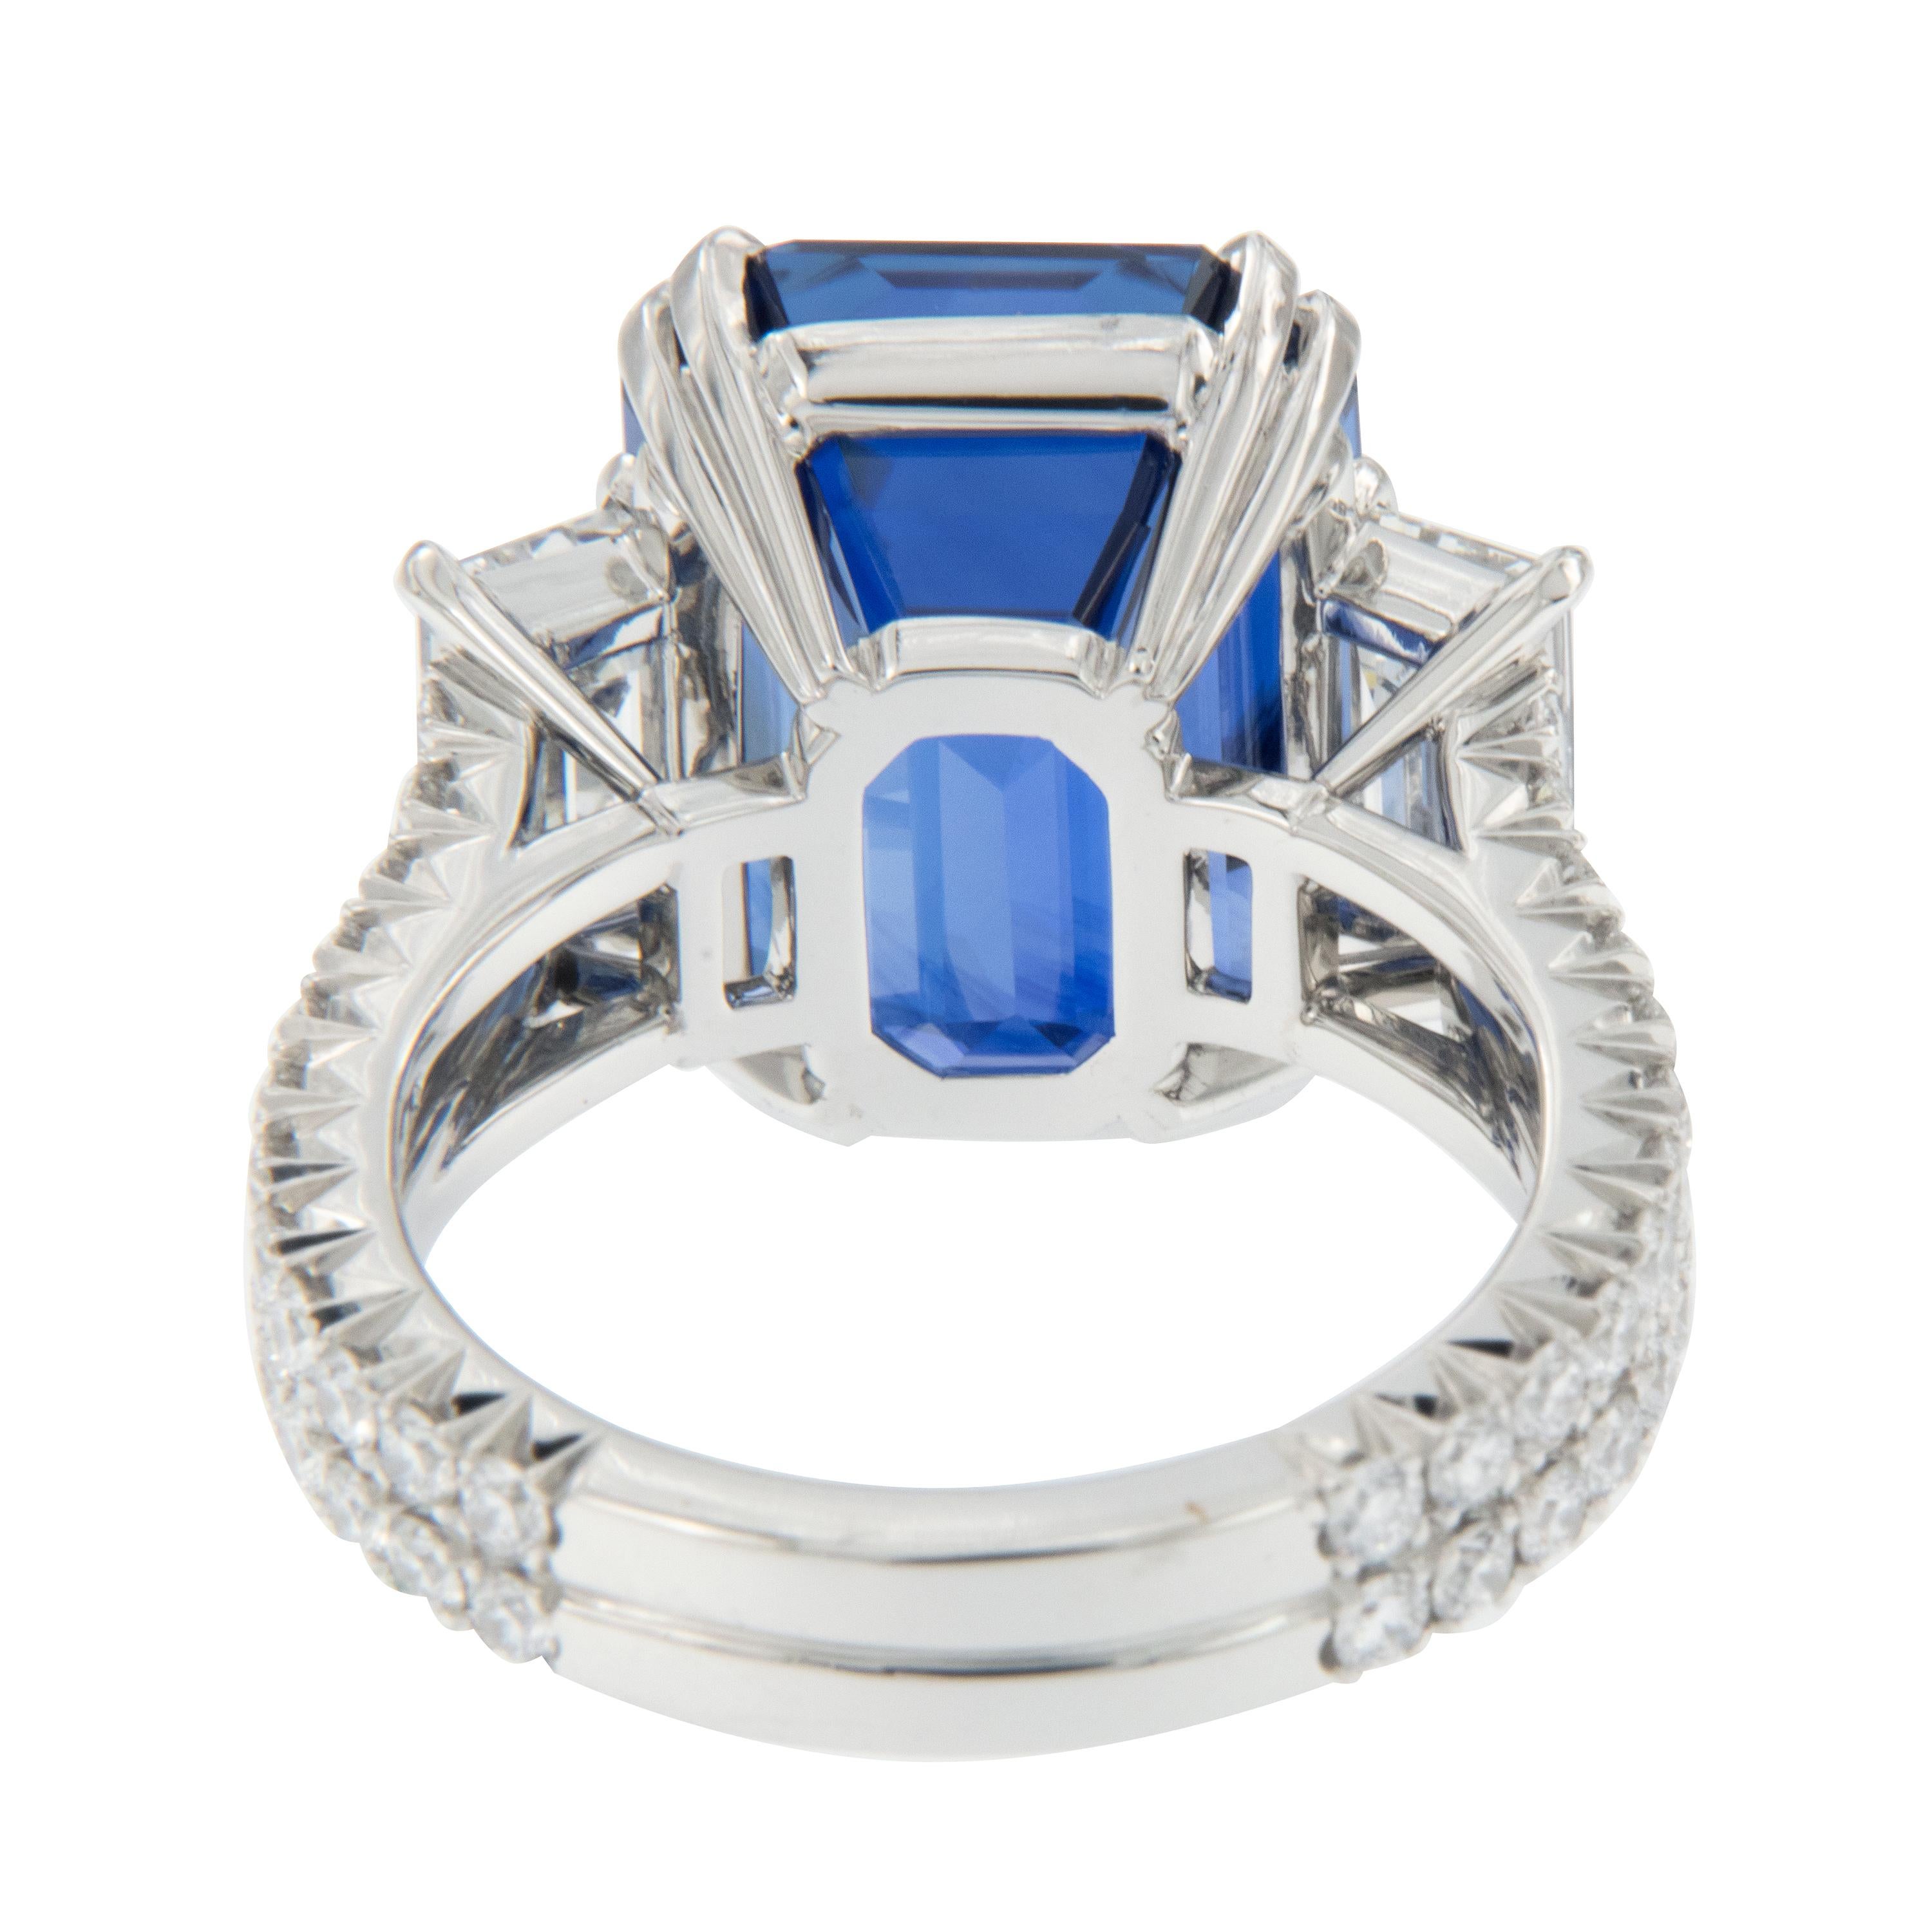 Emerald Cut Platinum 14.81 Ct Natural Sapphire and 1.54 Ct Diamond Ring with GRS & GIA Certs